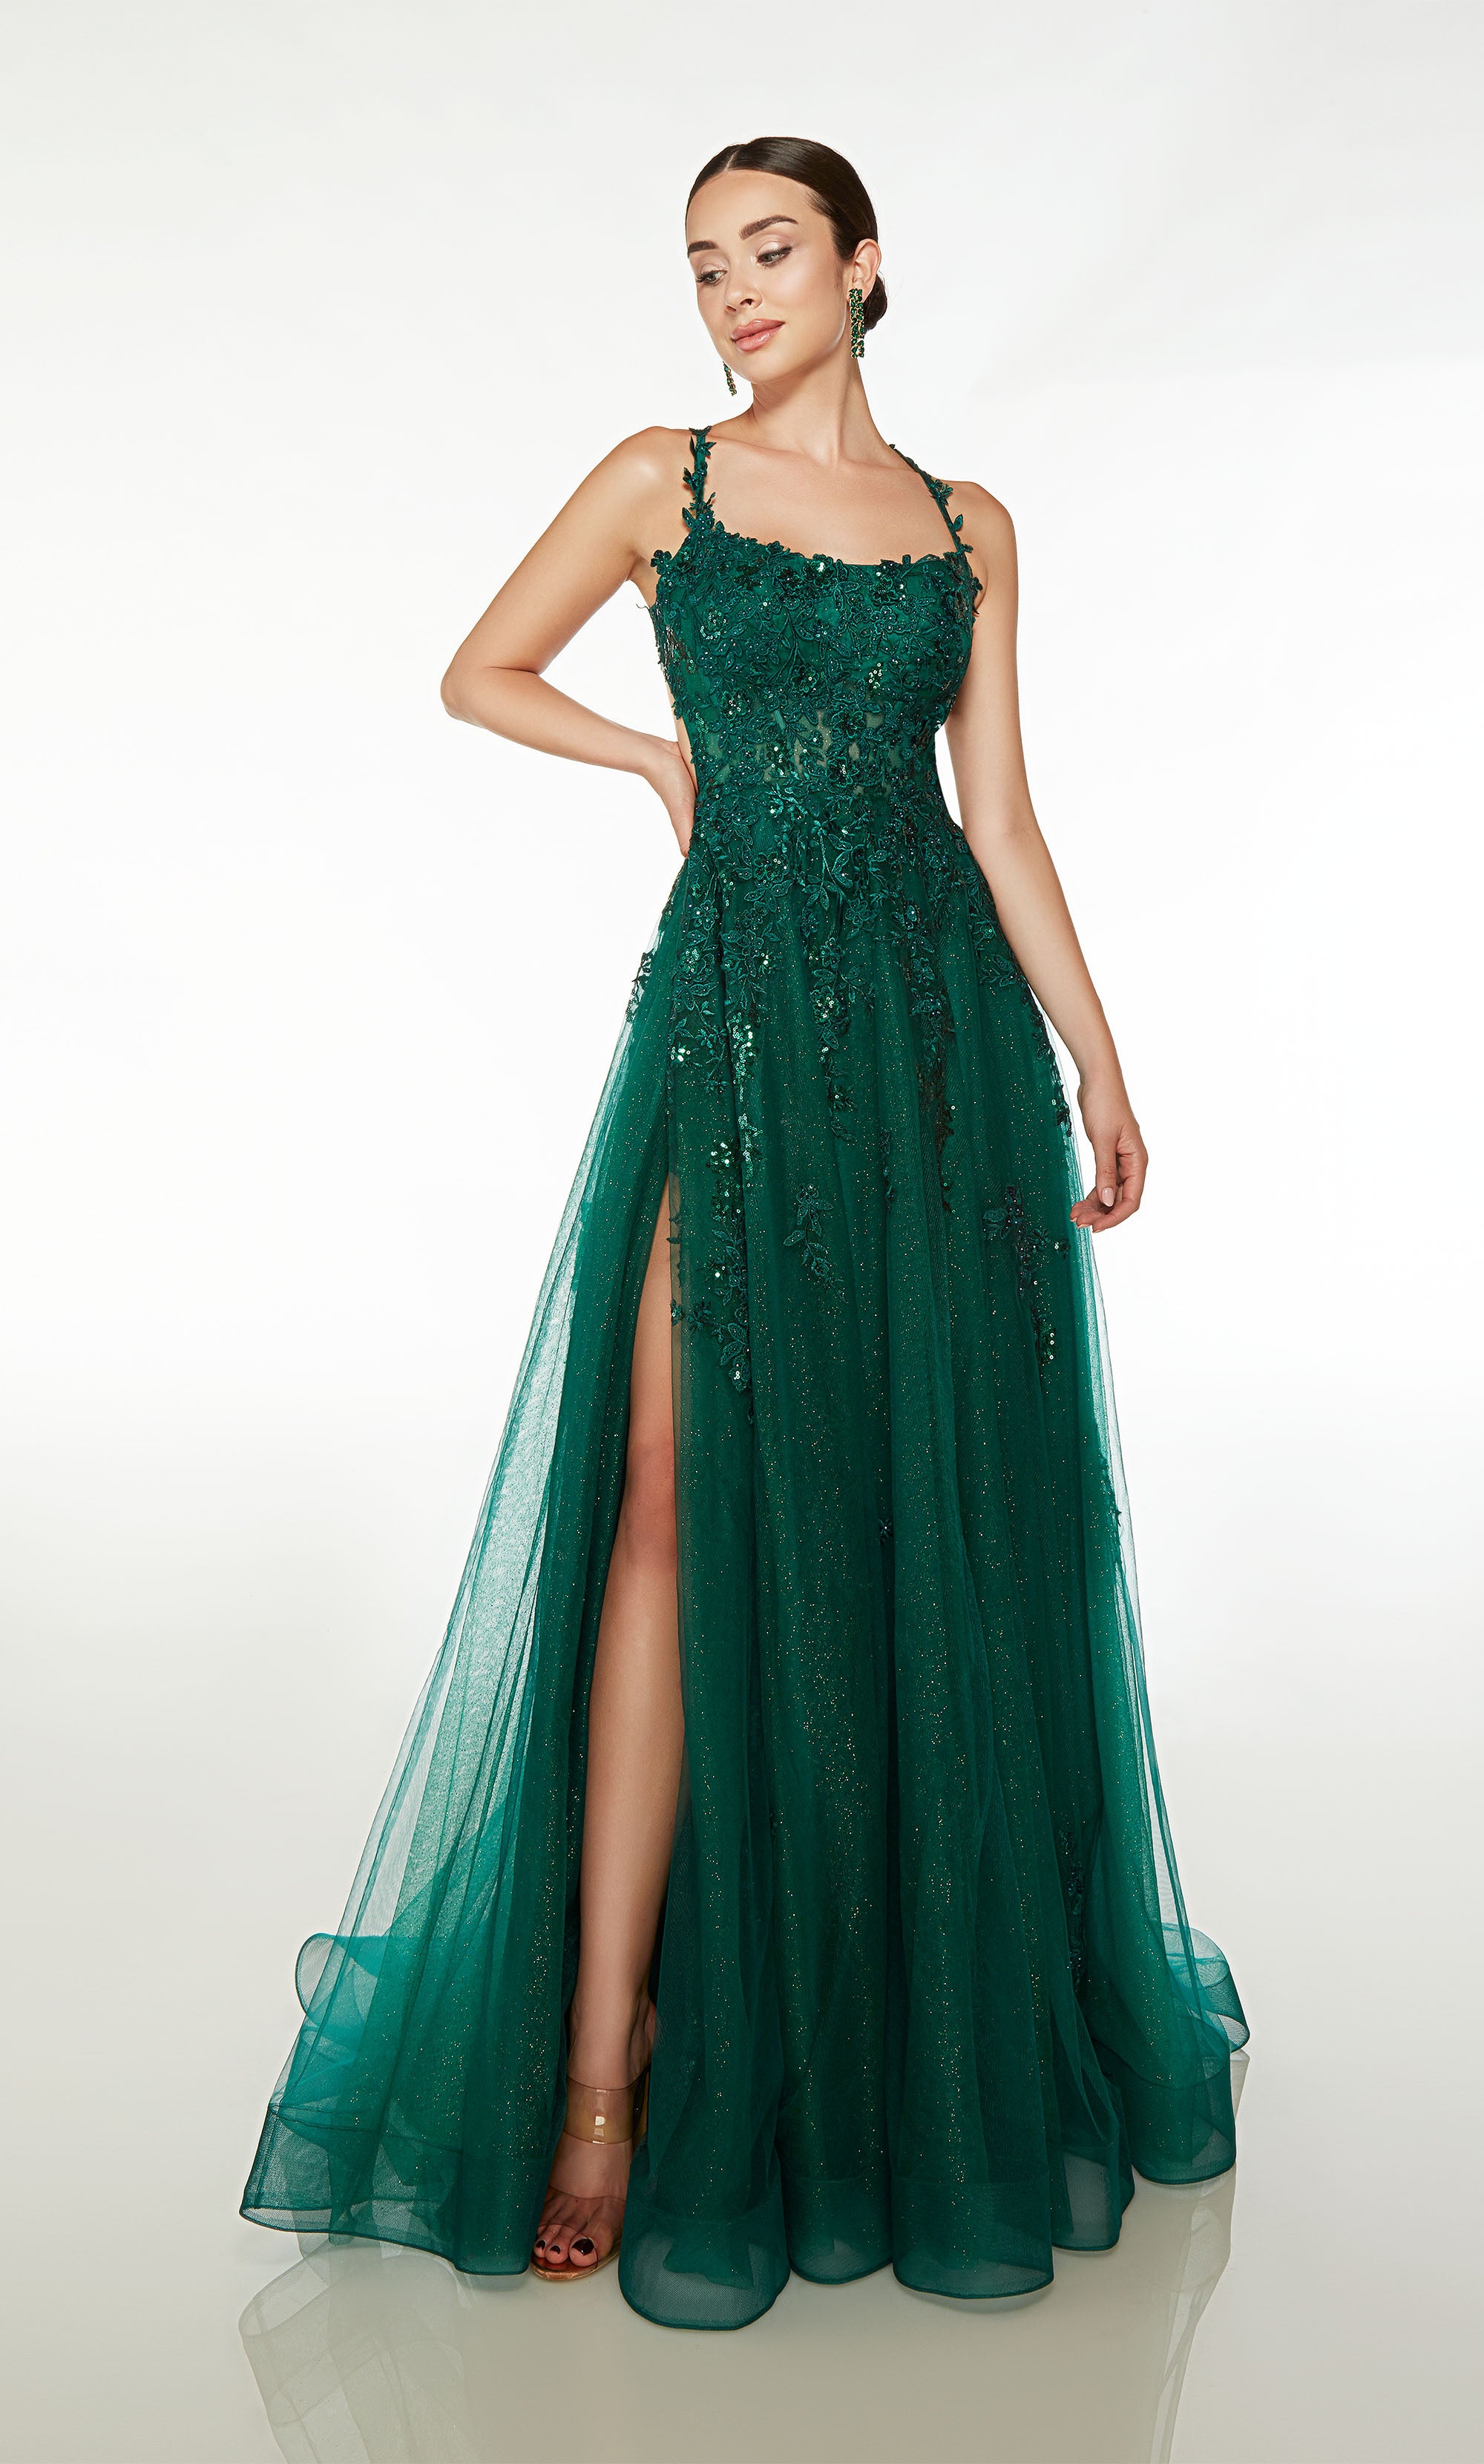 Green glitter tulle corset dress: scooped neckline, side slit, crisscross strappy back, train, and floral lace appliques for an charming look.